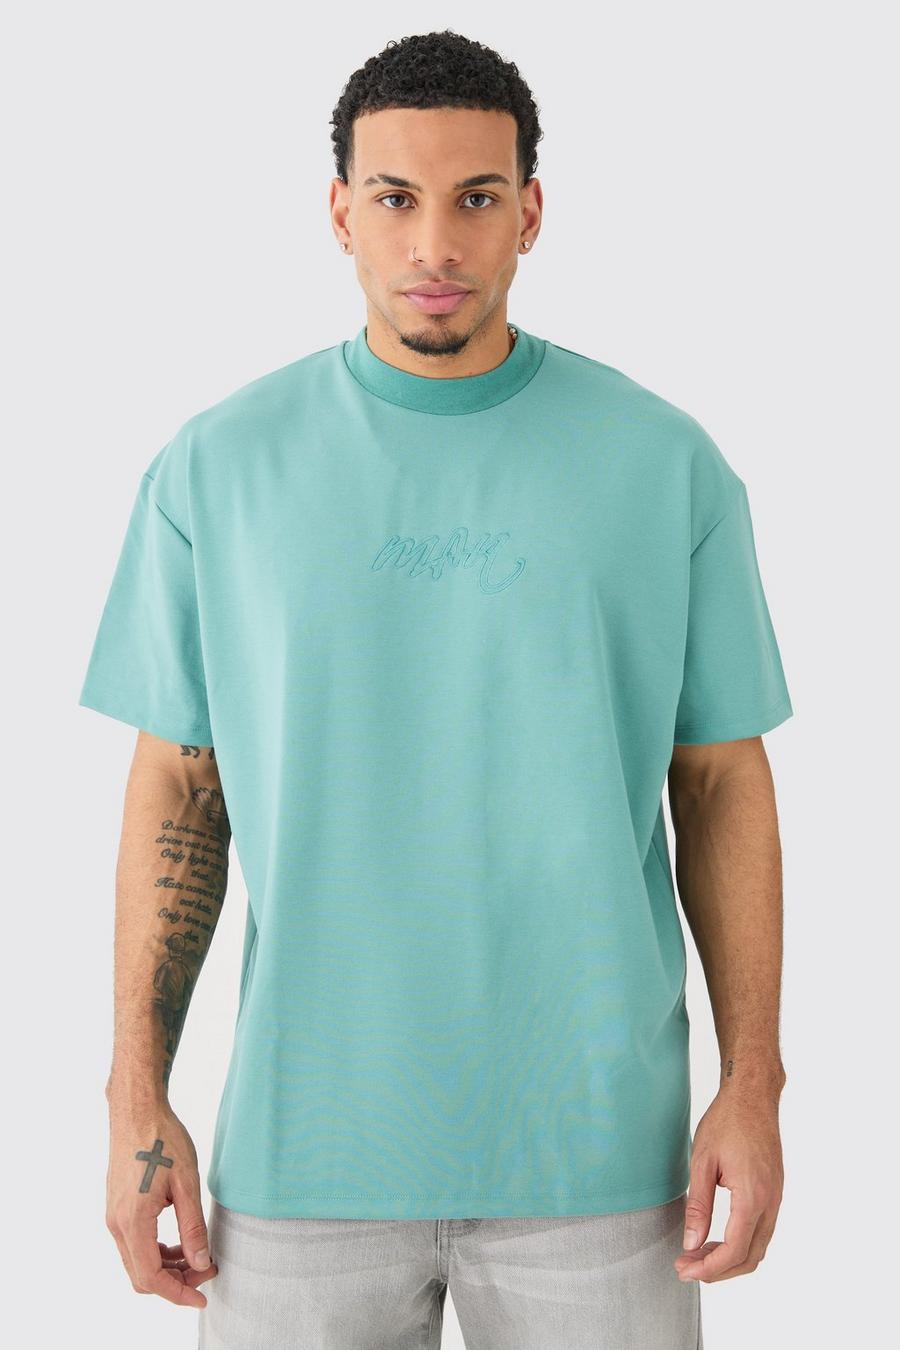 Teal Oversized Premium Super Heavyweight Embroidered T-shirt